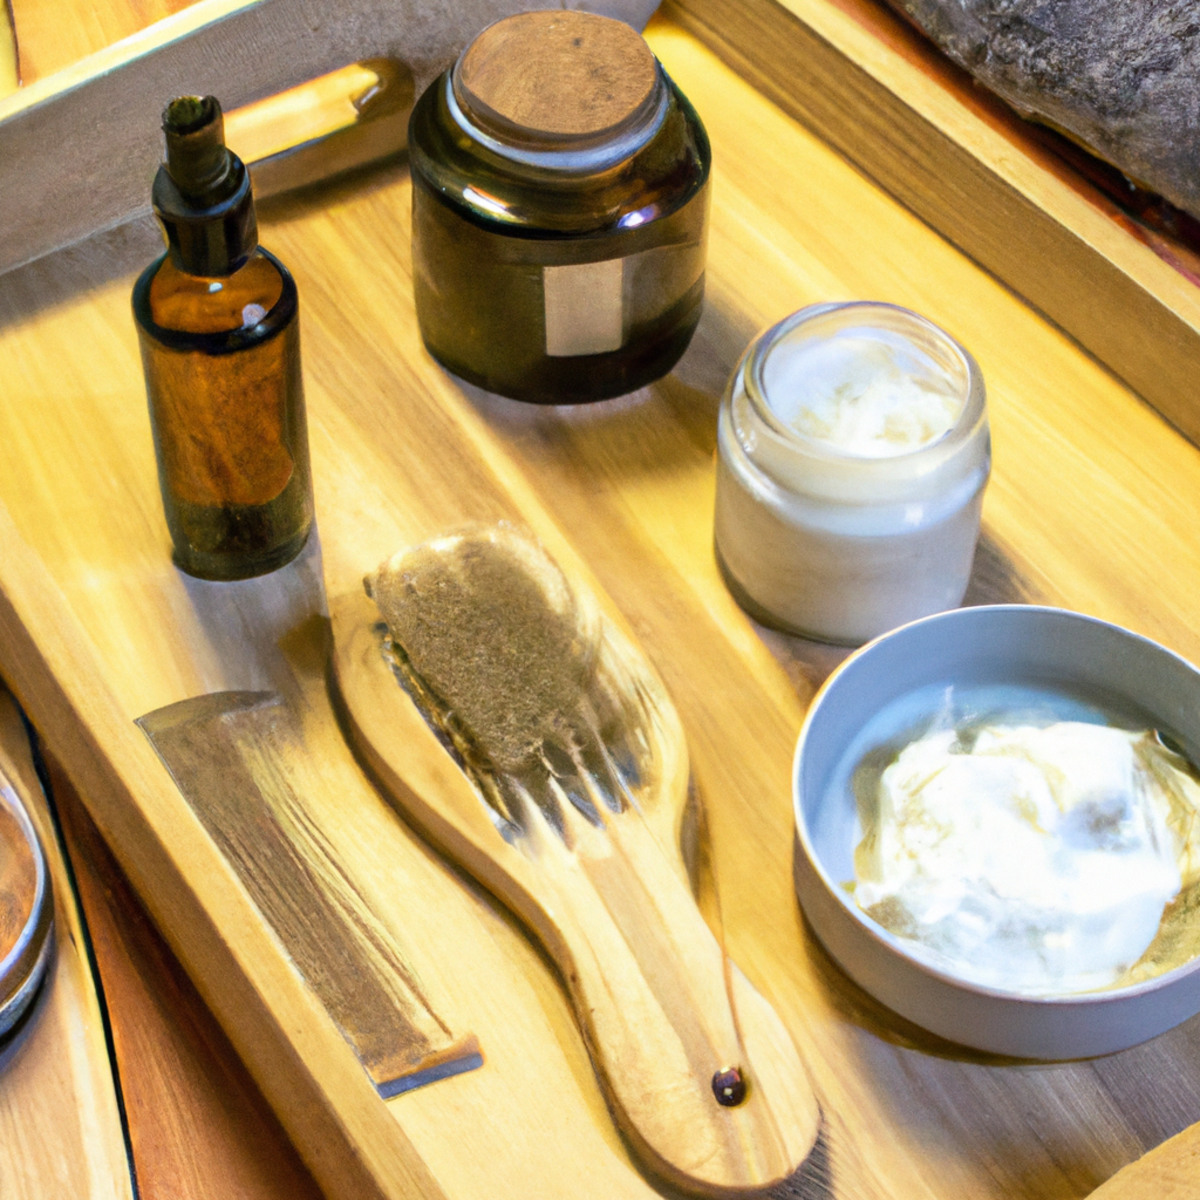 Get ready to beard the world with these natural skin care routines for men! From exfoliating scrubs to creamy moisturizers, this wooden tray has got you covered. Say goodbye to harsh chemicals and hello to a rustic, masculine glow.